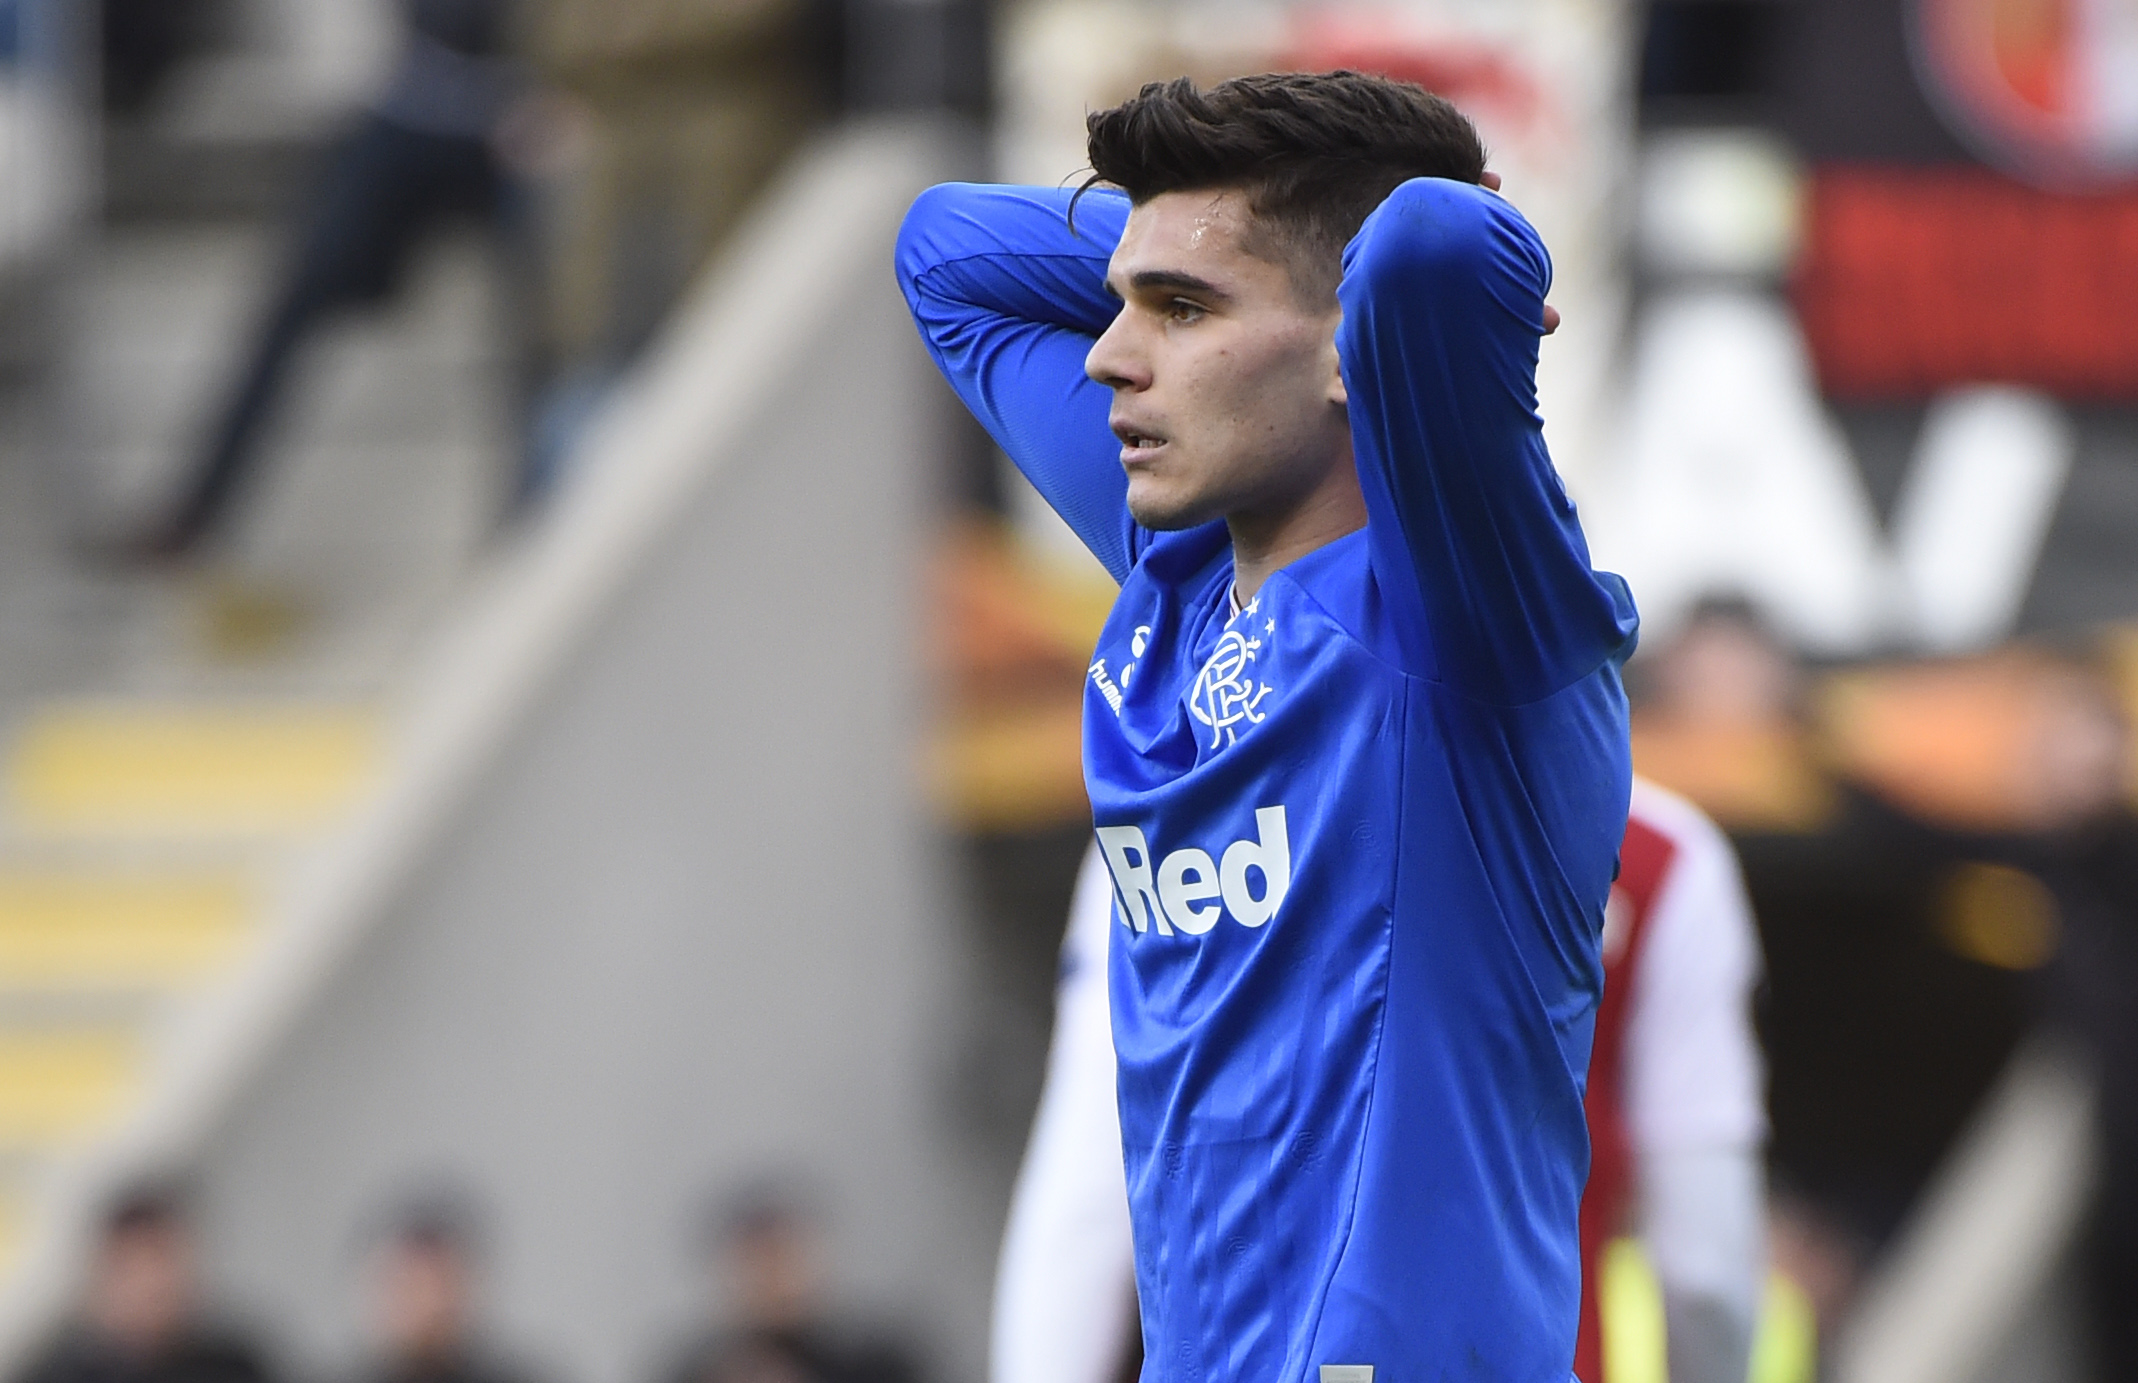 Rangers' Romanian midfielder Ianis Hagi reacts to missing a chance to score a goal during the UEFA Europa League round of 32 second leg football match between SC Braga and Rangers at the Municipal stadium in Braga on February 26, 2020.